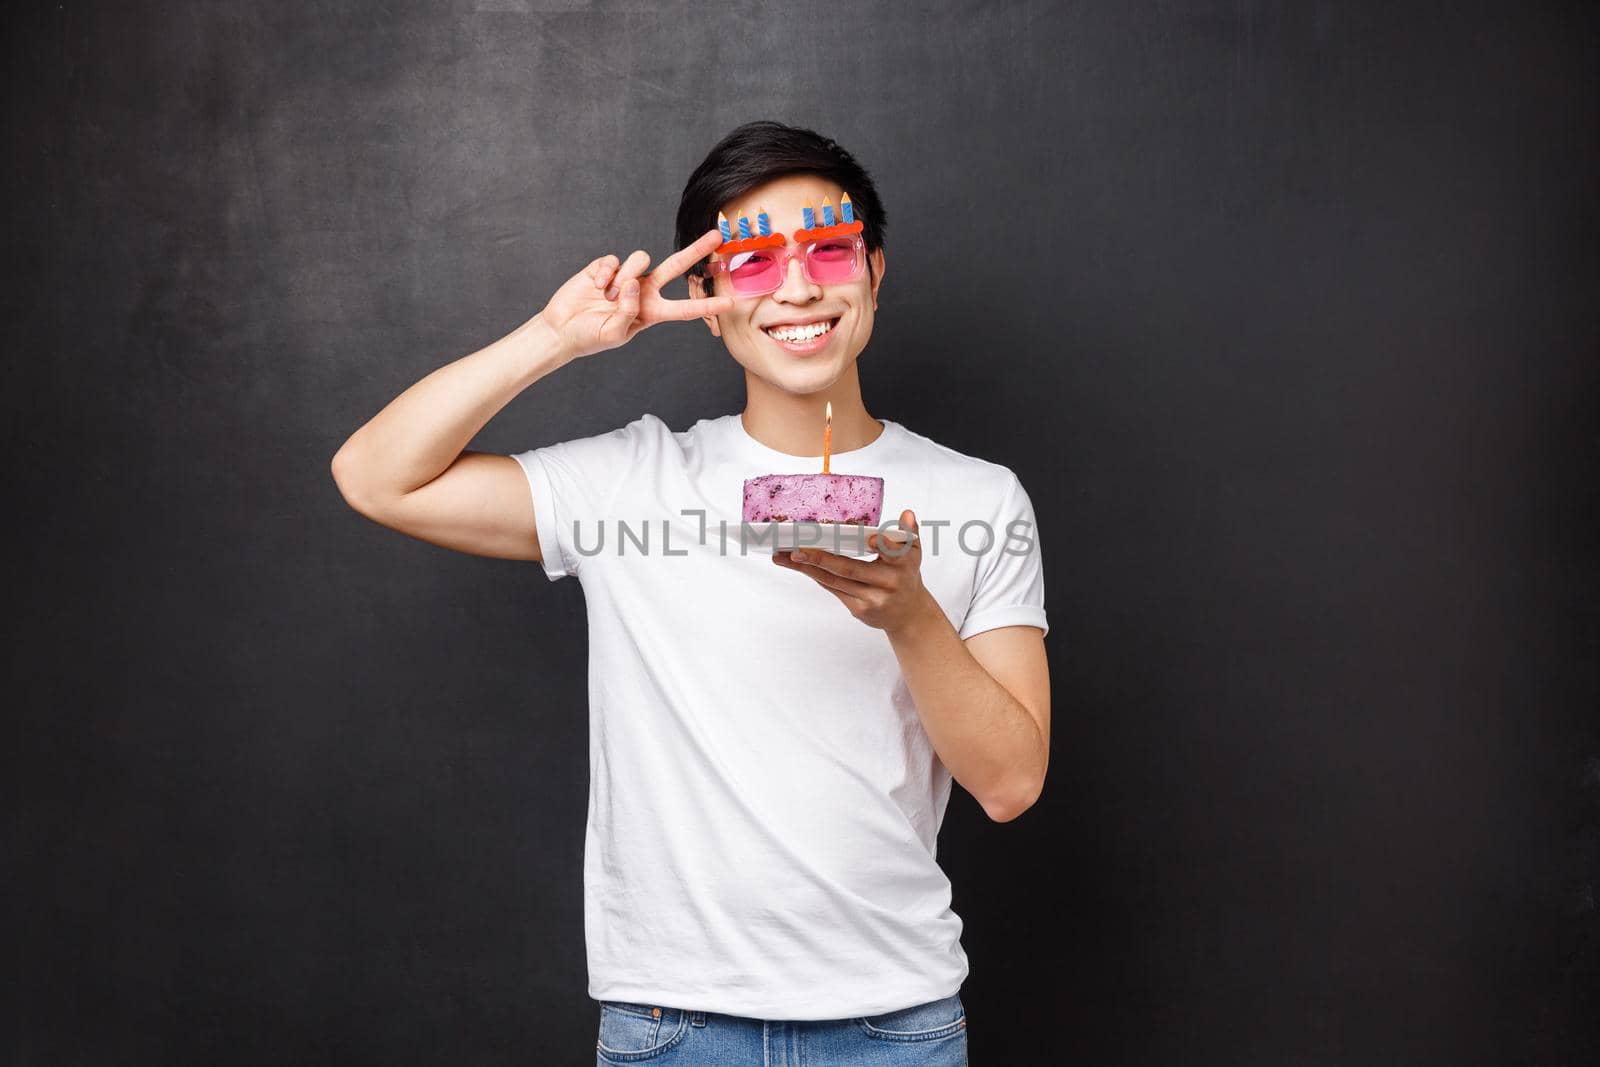 Birthday, celebration and party concept. Portrait of happy friendly smiling asian man enjoying b-day, wear funny glasses hold cake with lit candle, making wish, show peace sign near eye.